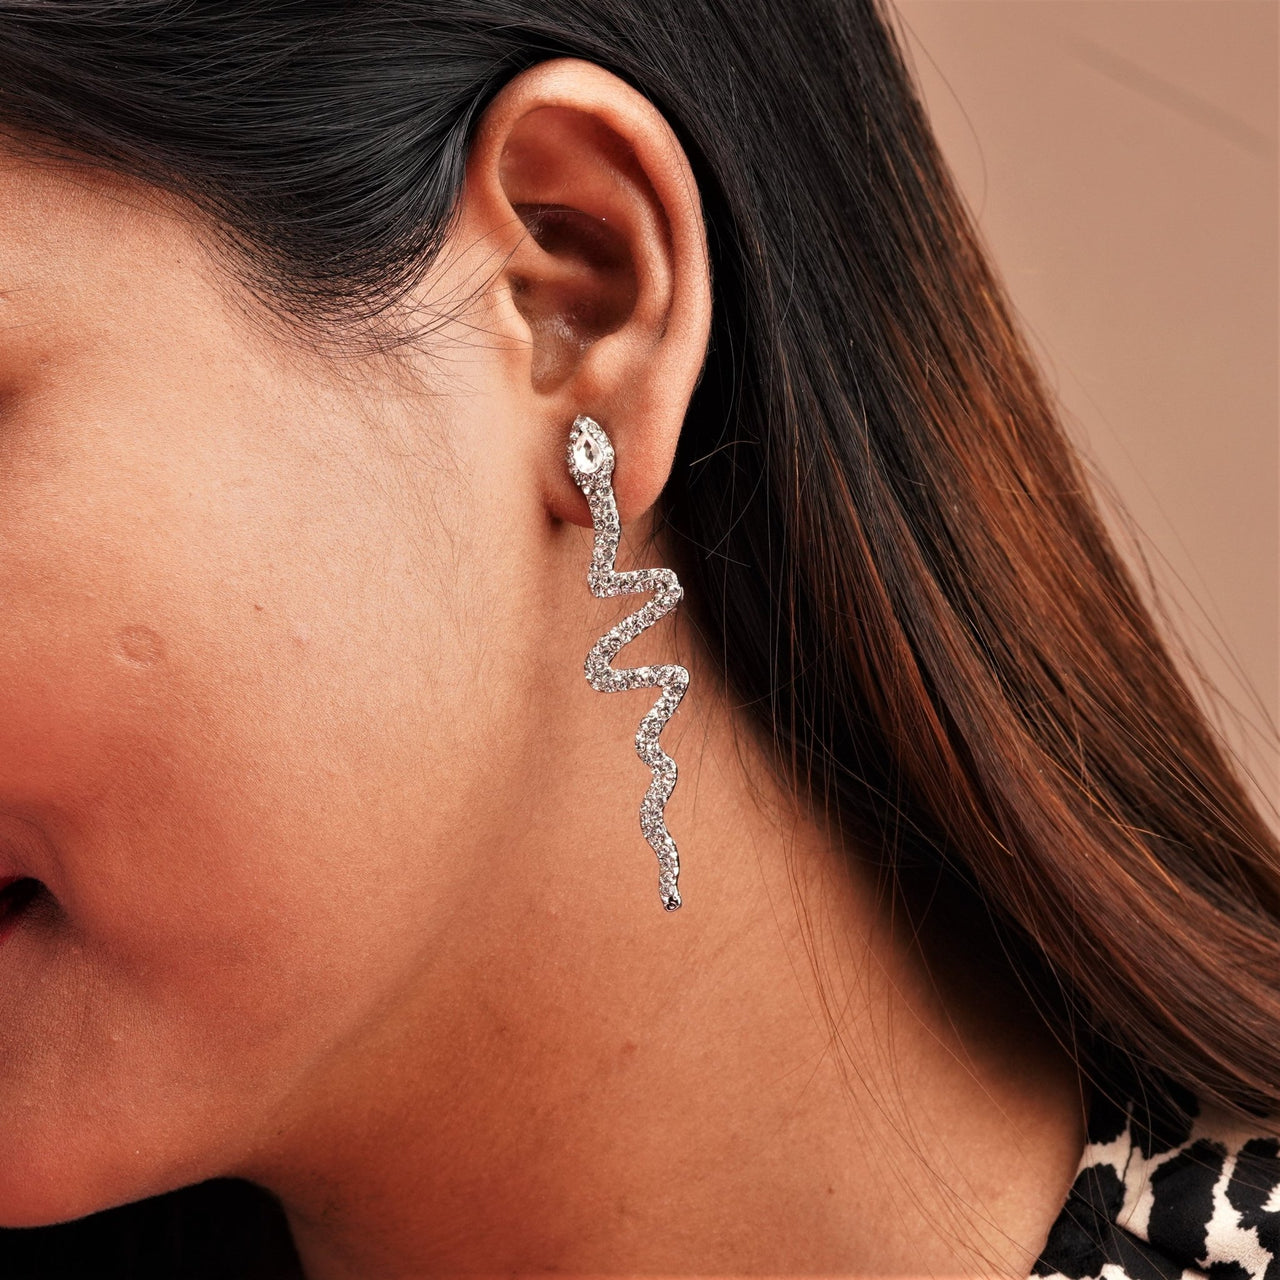 A snake design earring with stone hanging on ear